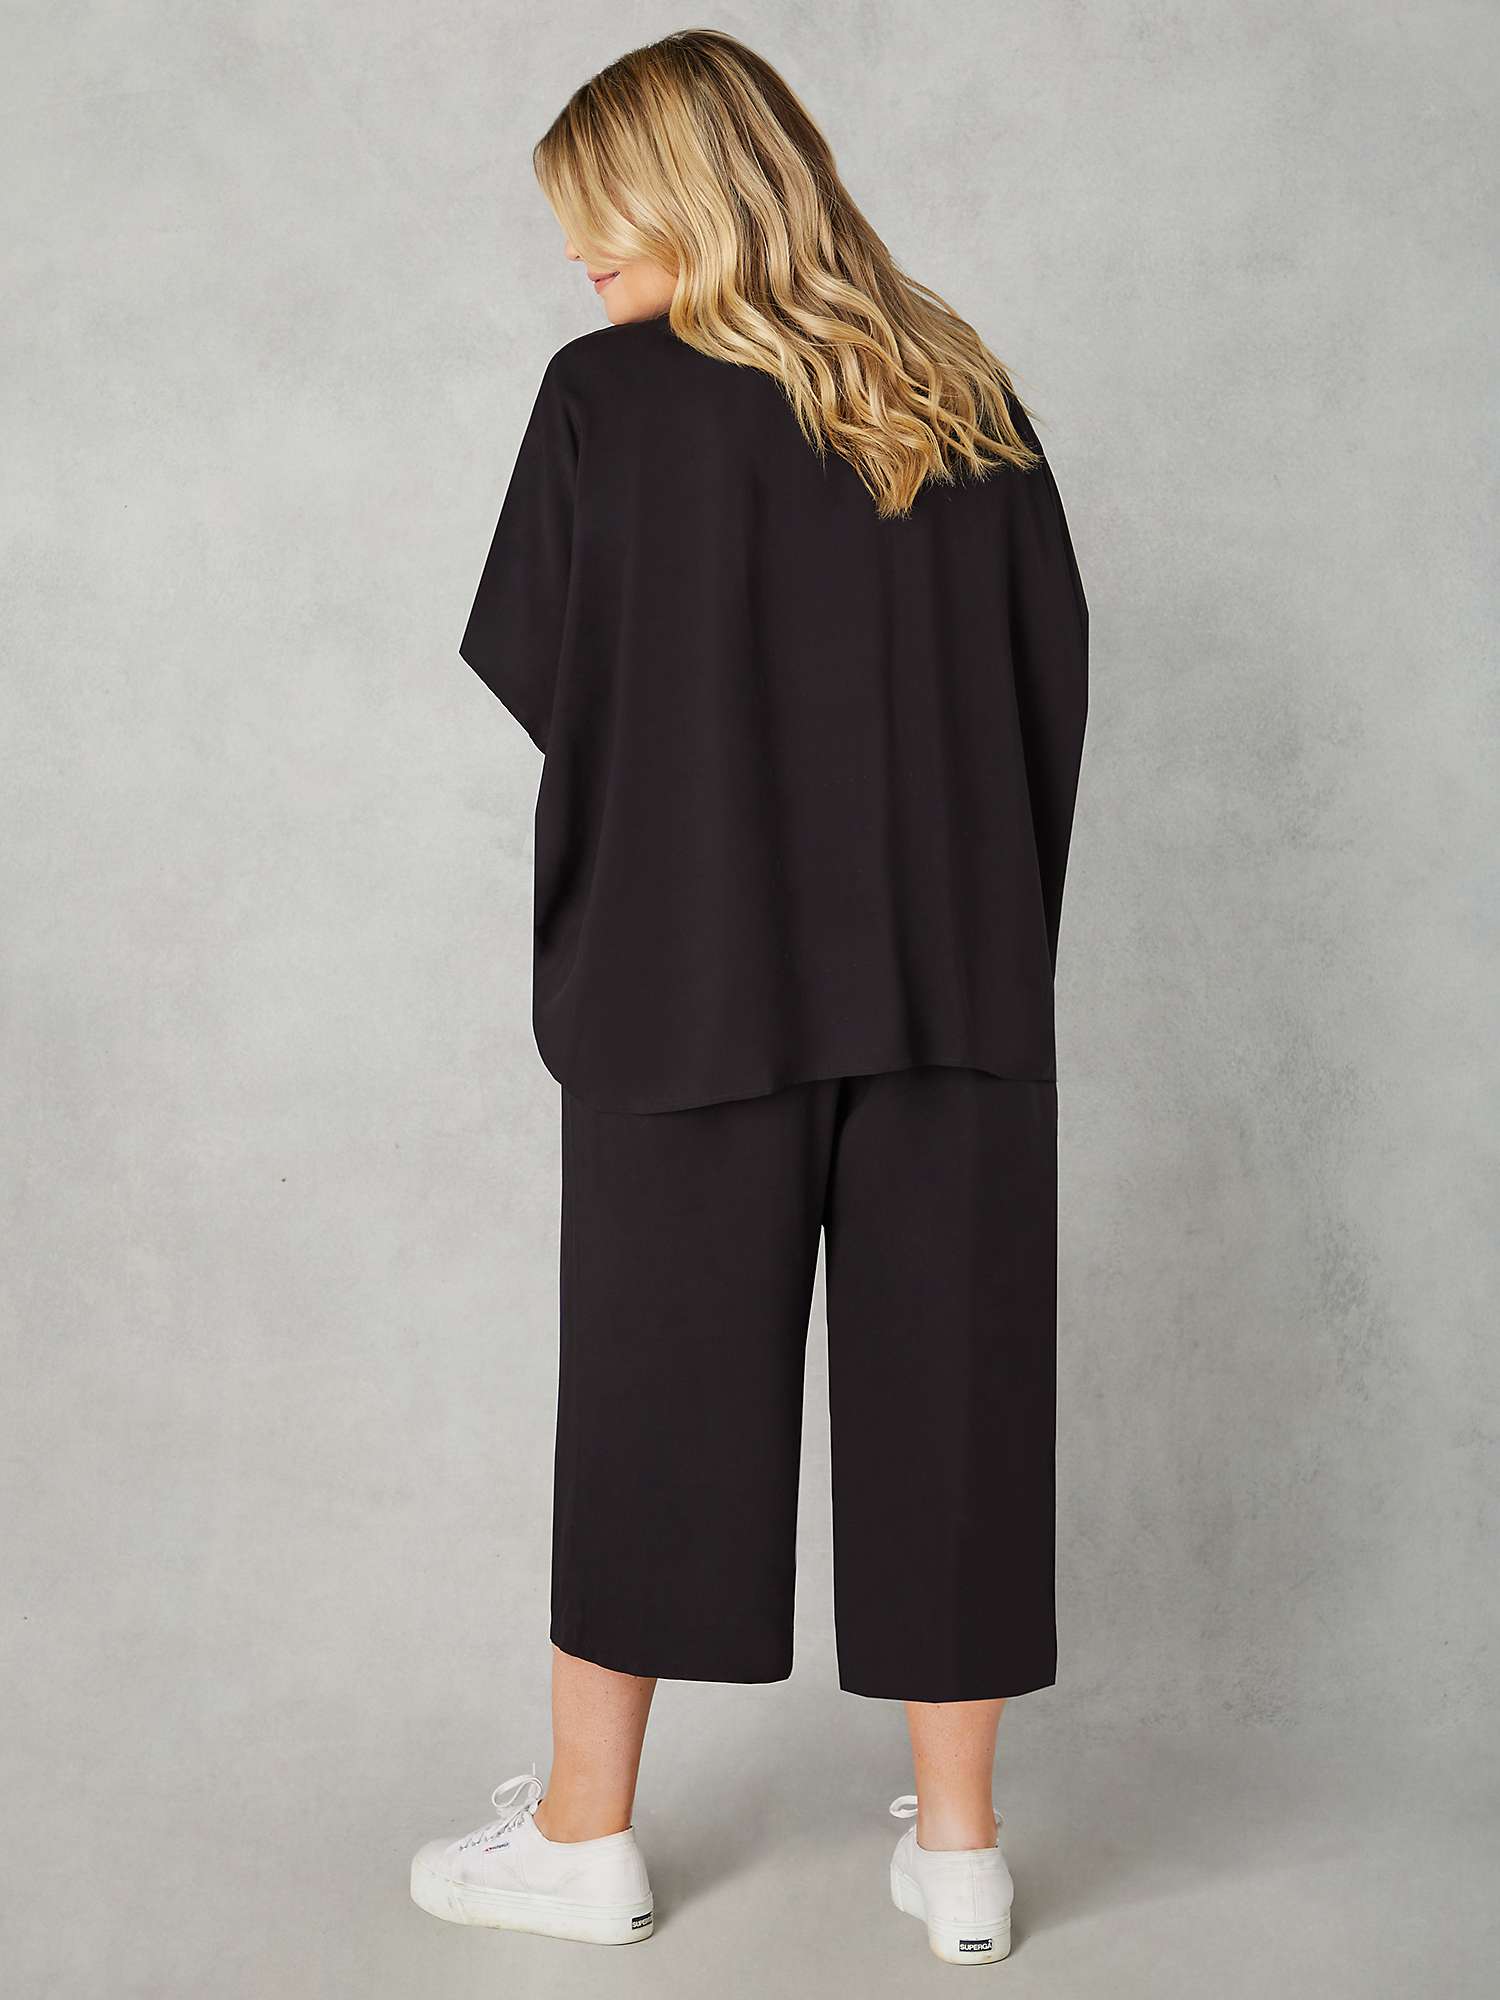 Buy Live Unlimited Curve Batwing Cover Up Online at johnlewis.com